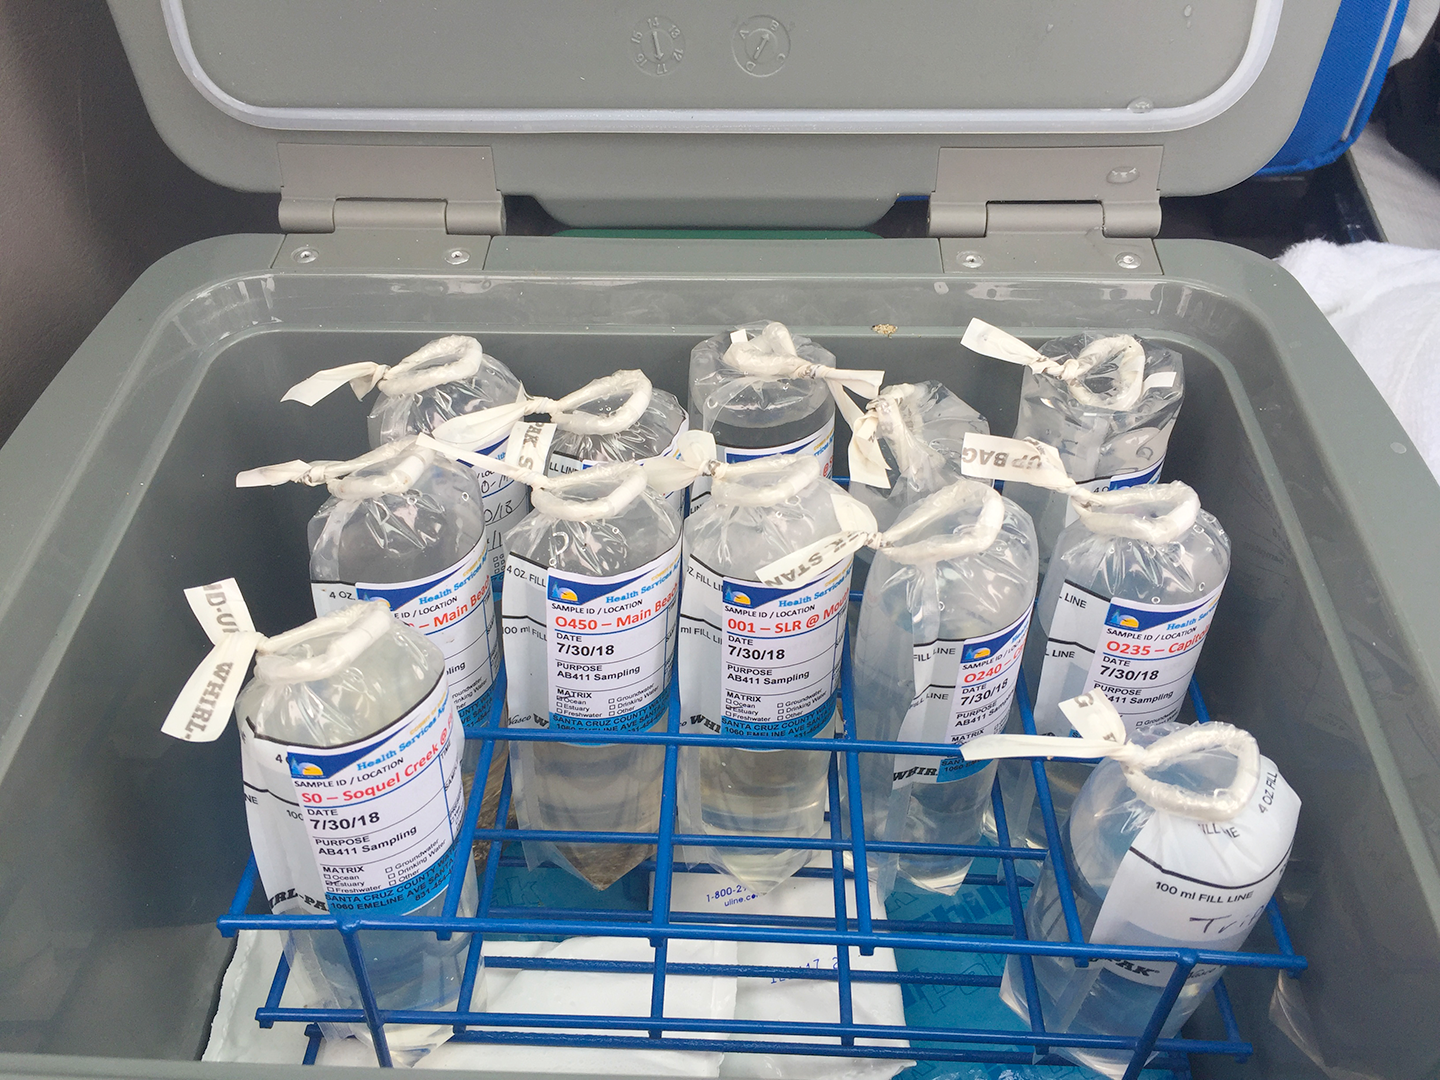 The morning's haul of water samples. These samples and more are collected at least weekly during summer months. Credit: Lark Starkey